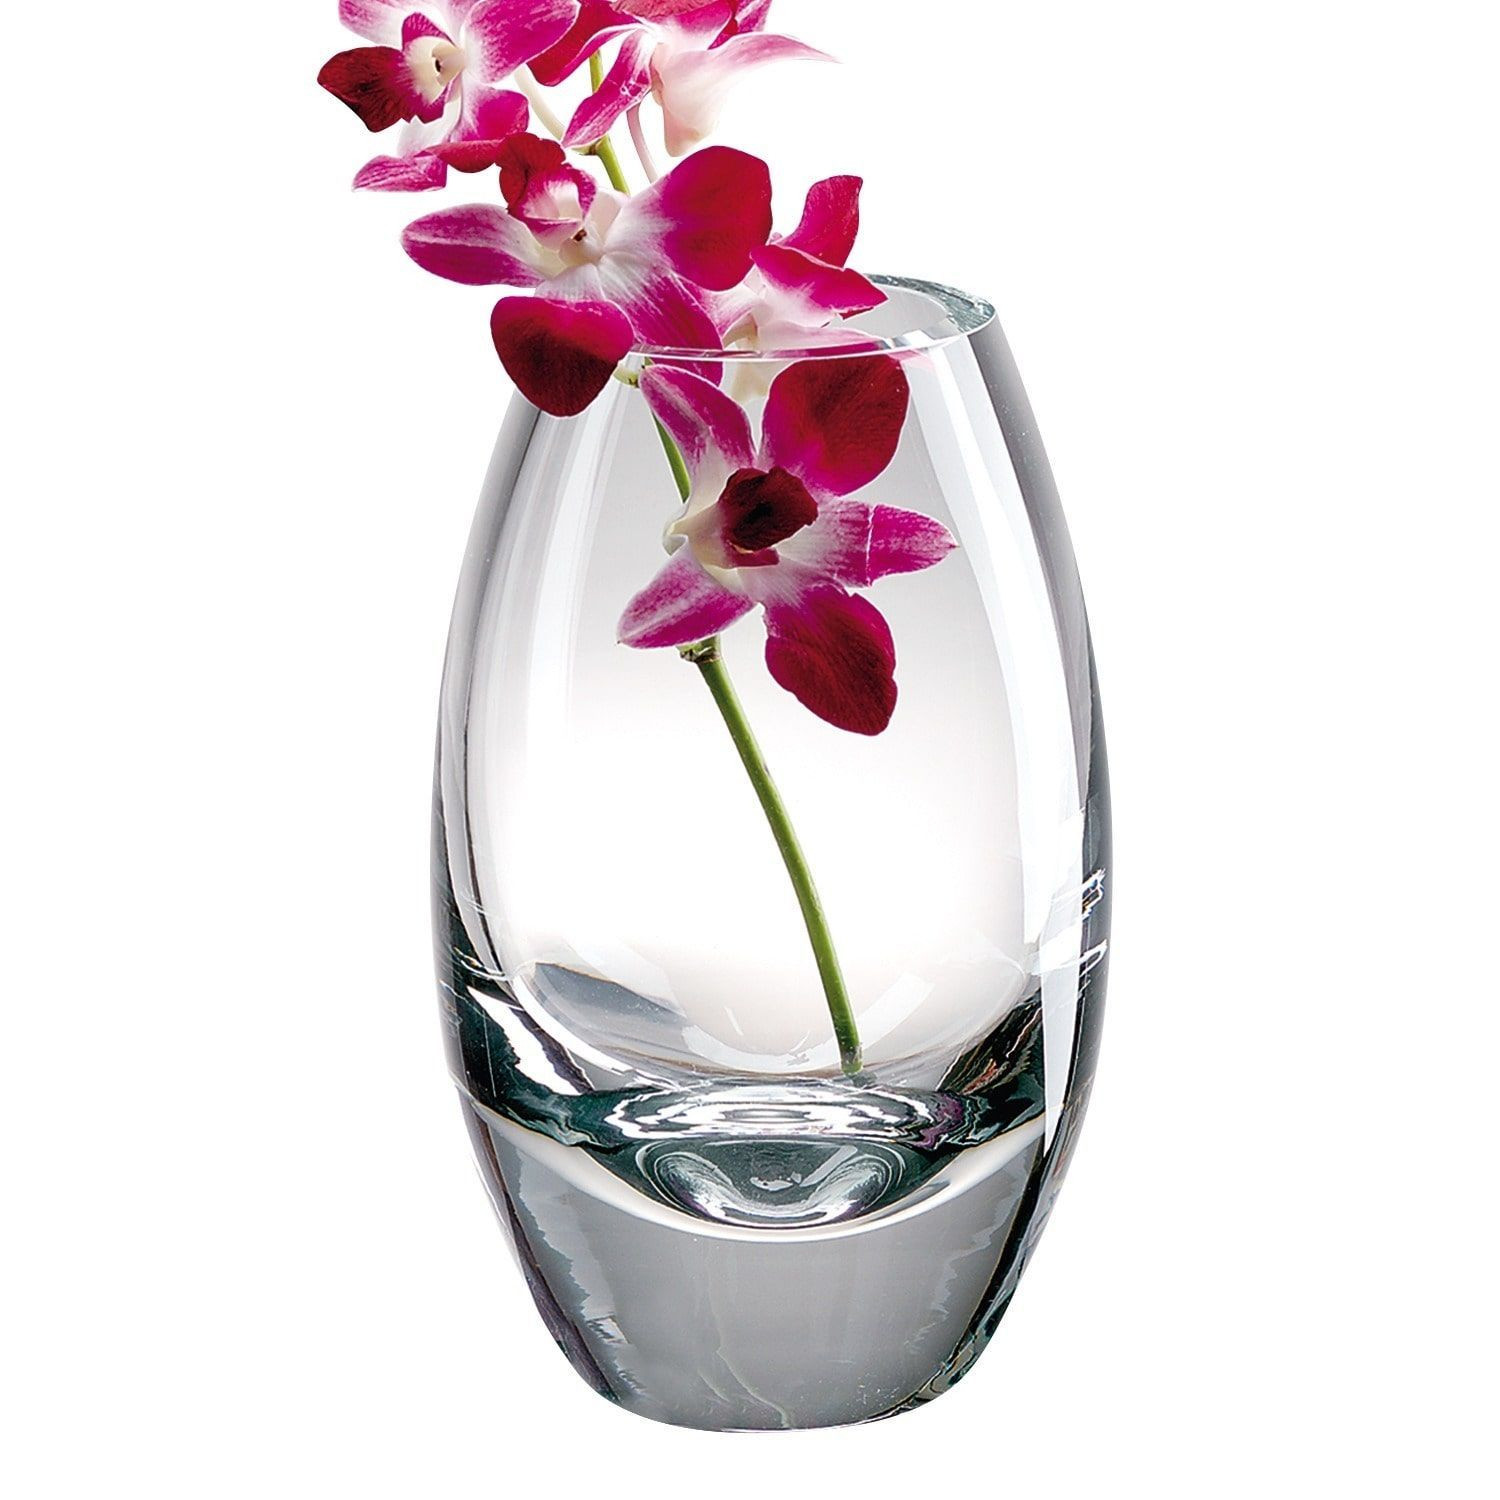 25 Stylish 10 Inch Clear Glass Vases 2024 free download 10 inch clear glass vases of badash radiant 10 inch vase radiant vase h10 clear outlet store pertaining to badash radiant 10 inch vase radiant vase h10 silver size medium